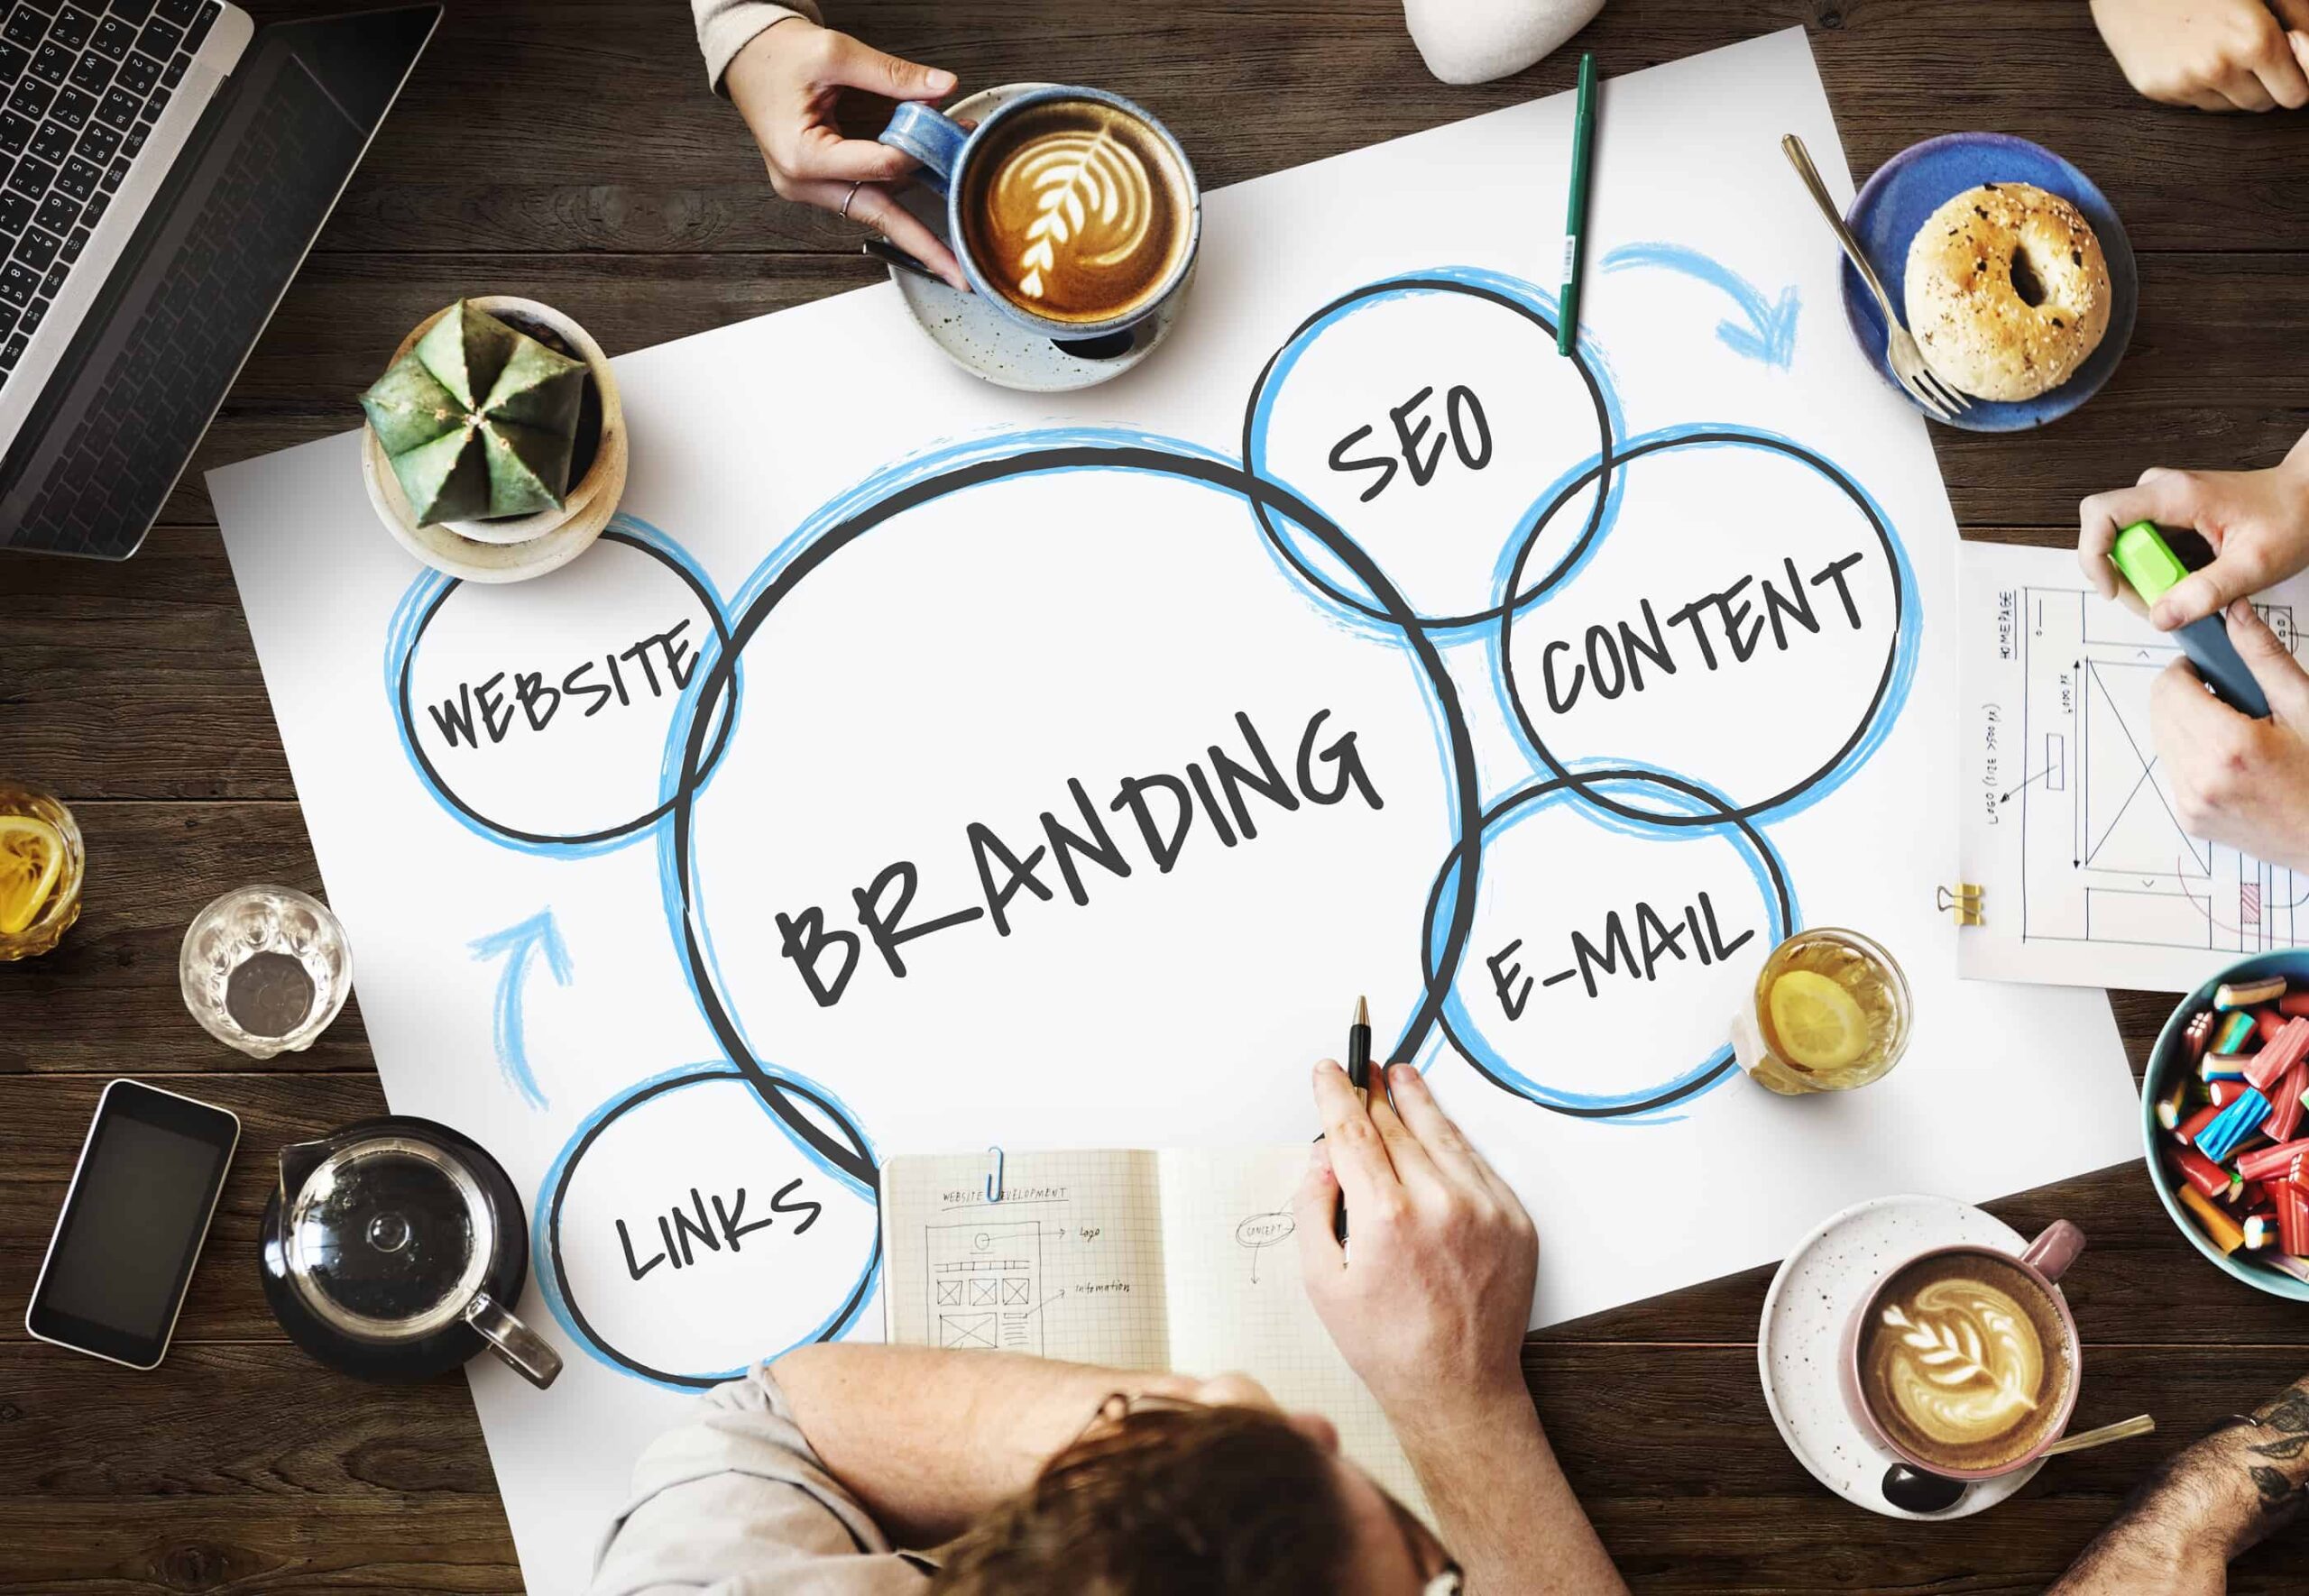 Know all about digital branding services